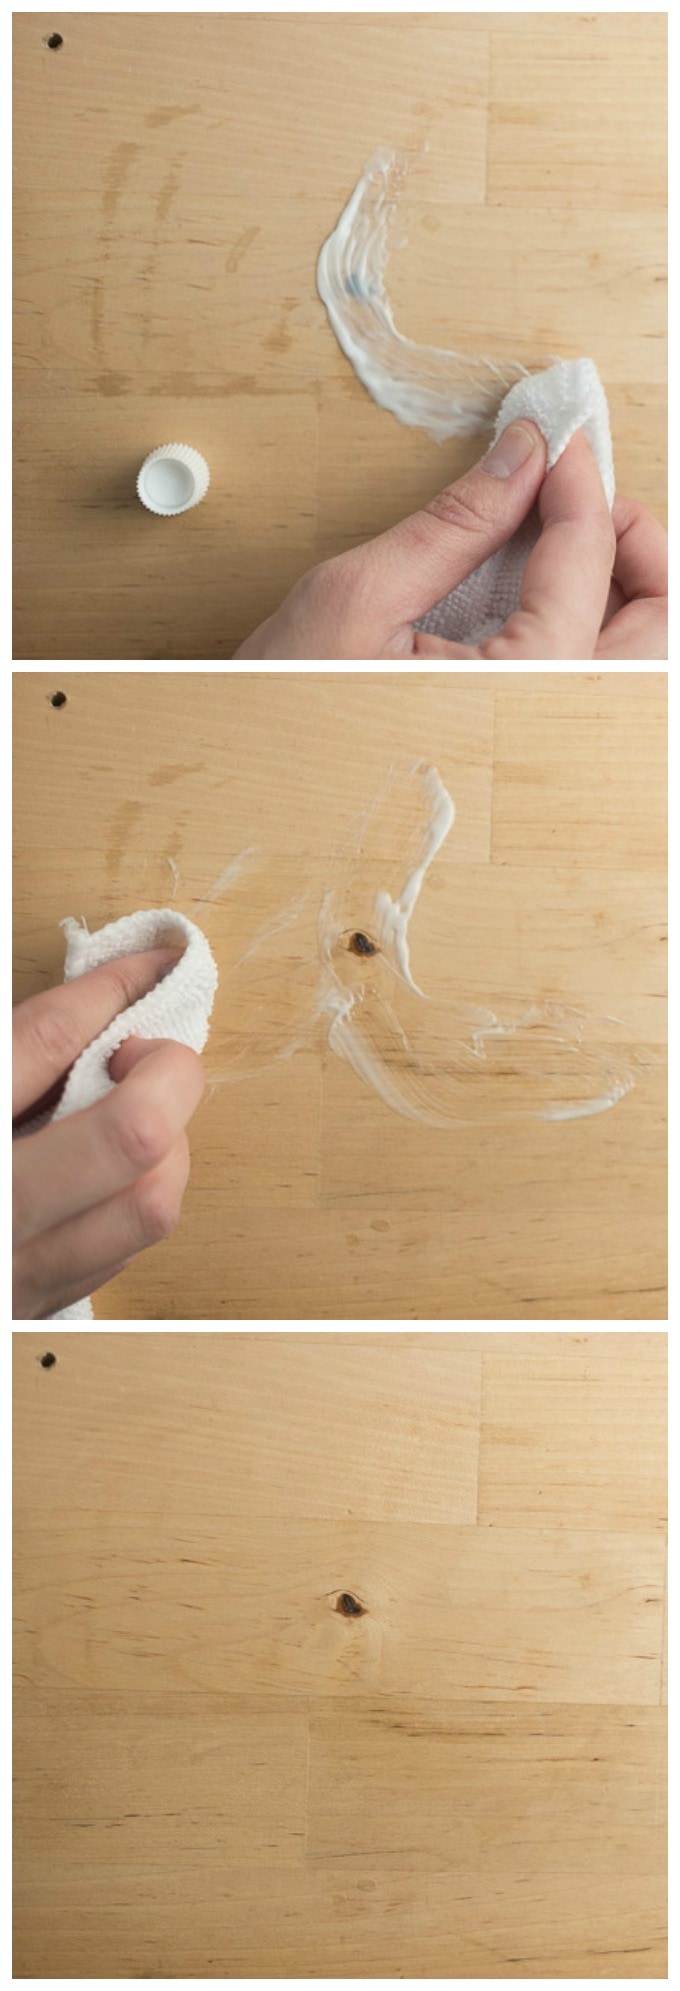 How to remove water stains from wood furniture - with toothpaste!